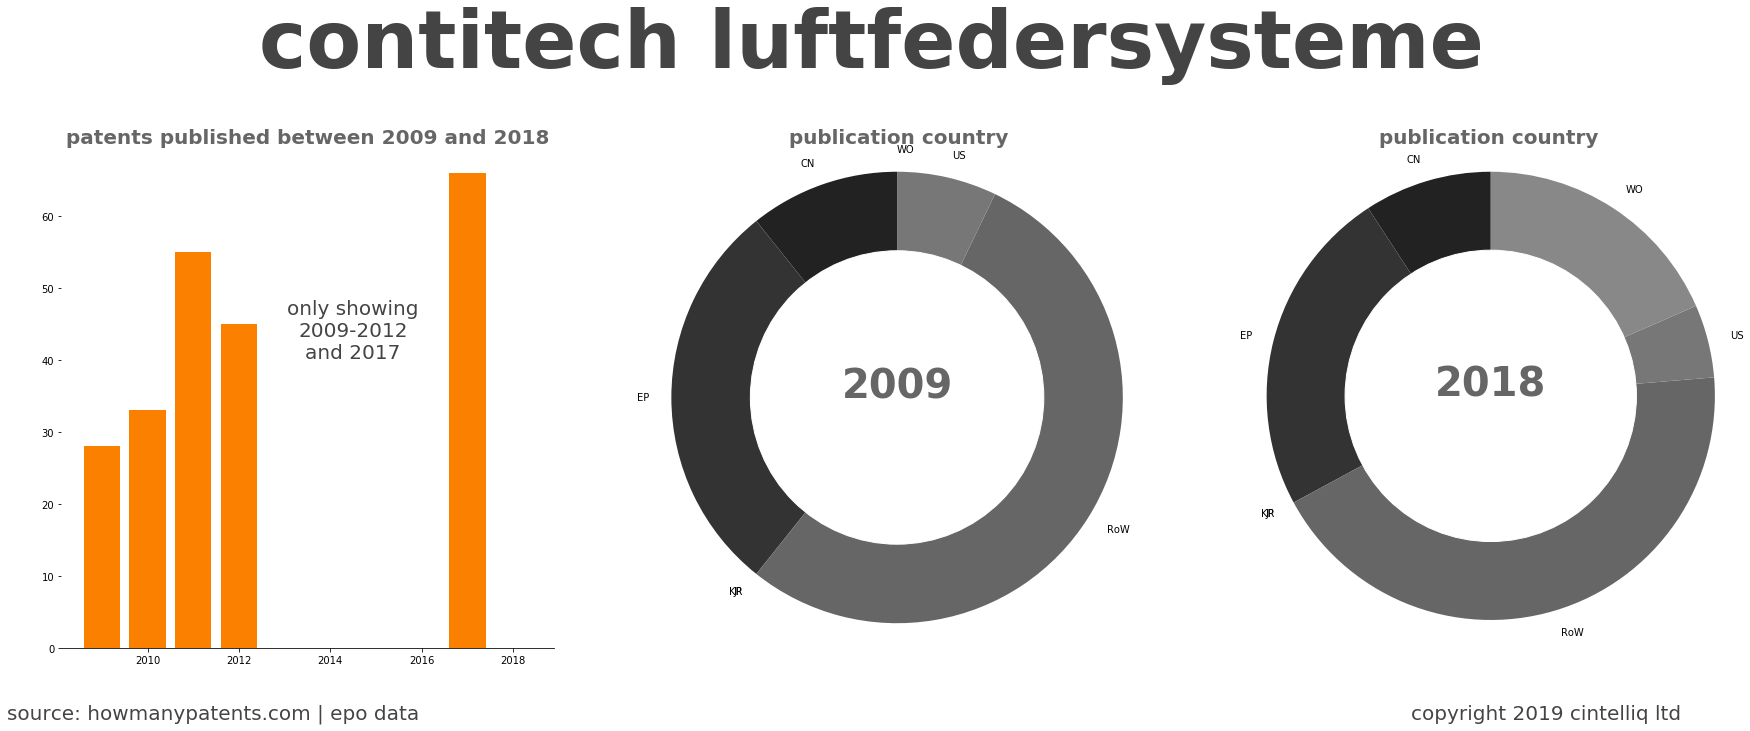 summary of patents for Contitech Luftfedersysteme